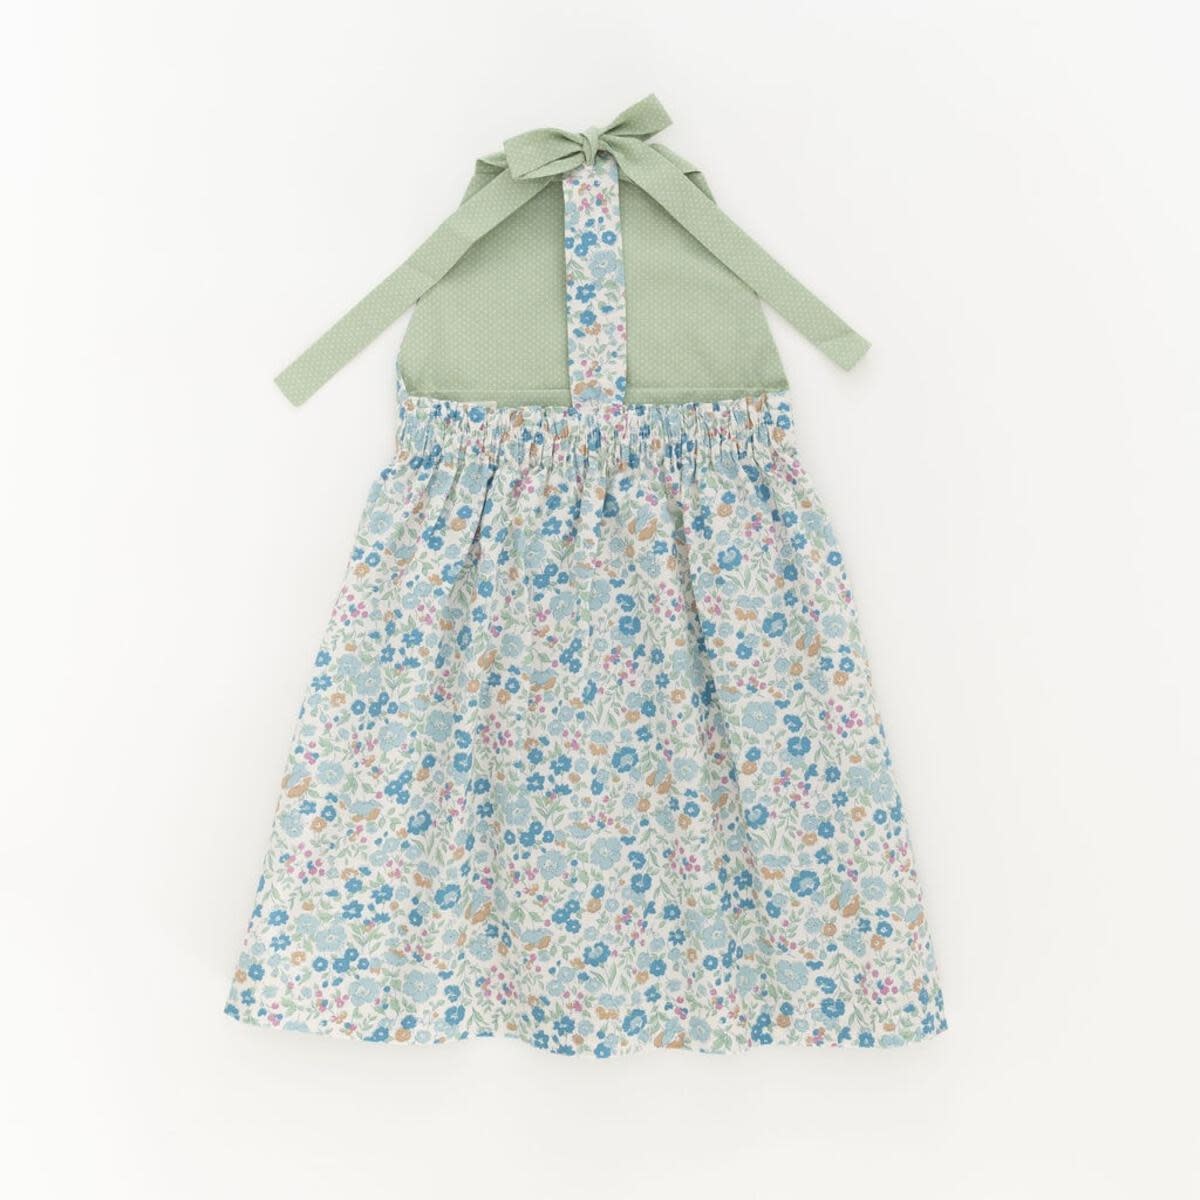 Thimble Thimble T-Back Dress in Bluebell